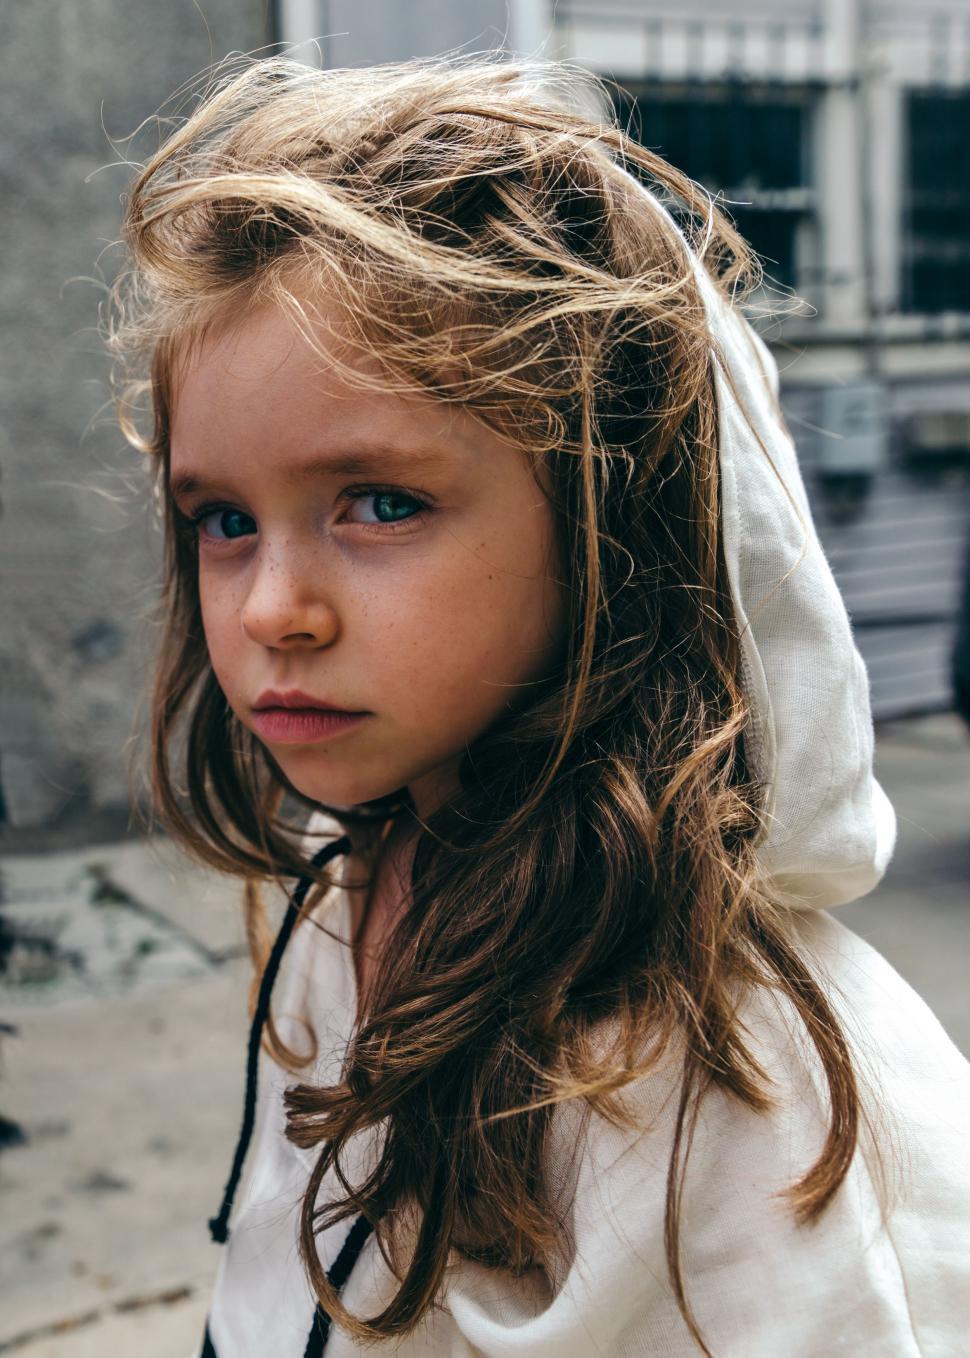 Free Image of Young Girl With Blue Eyes and a Hoodie 